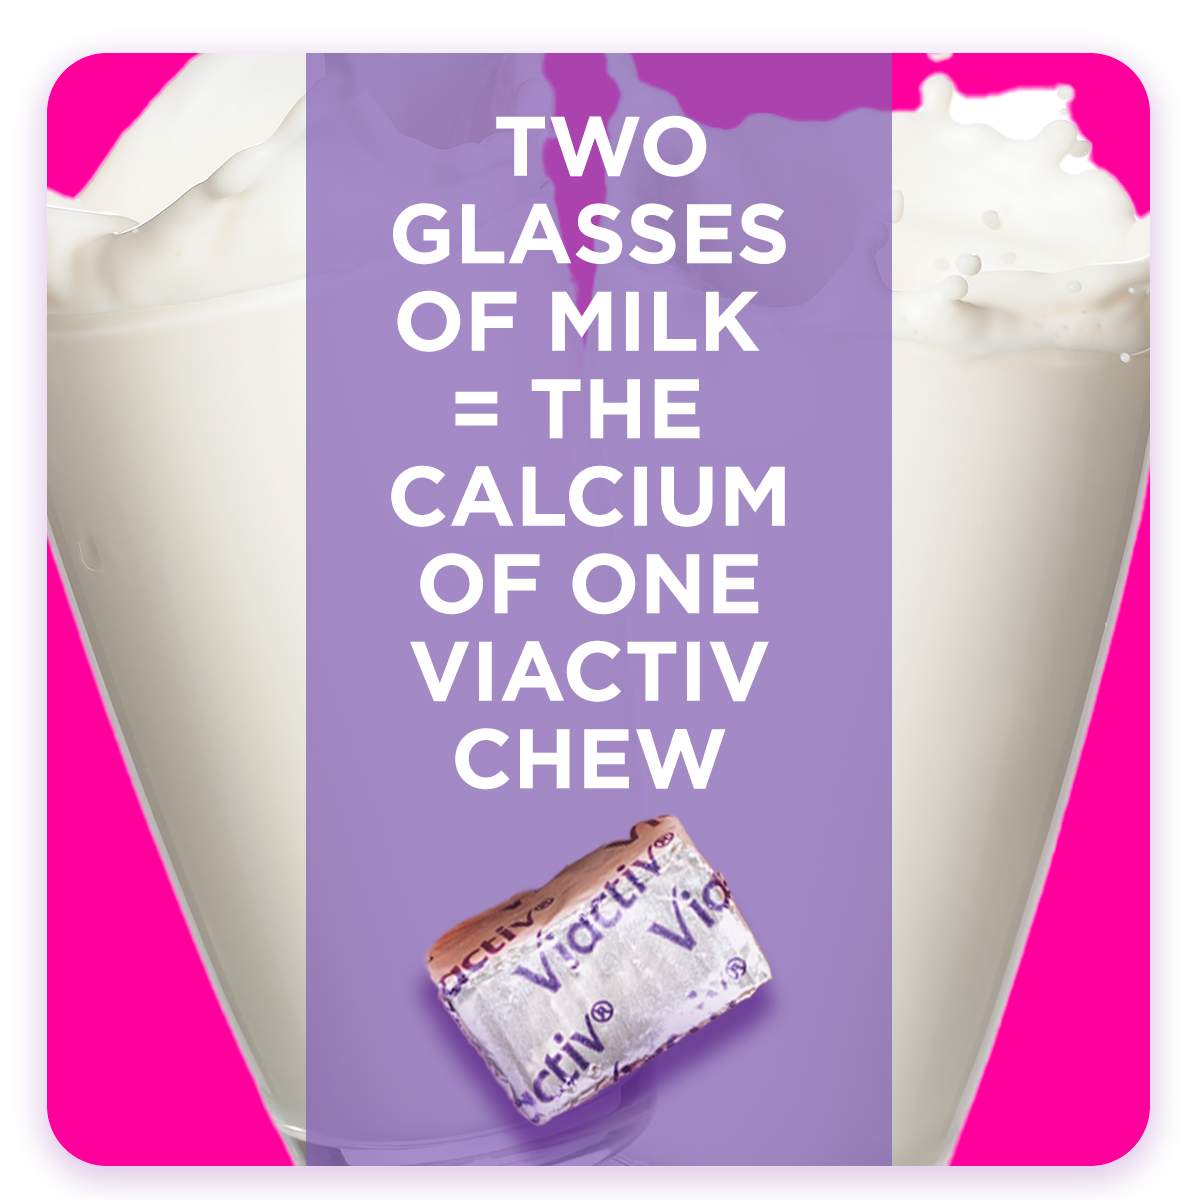 Two Glasses of Milk Equals the Calcium of One Viactiv Chew